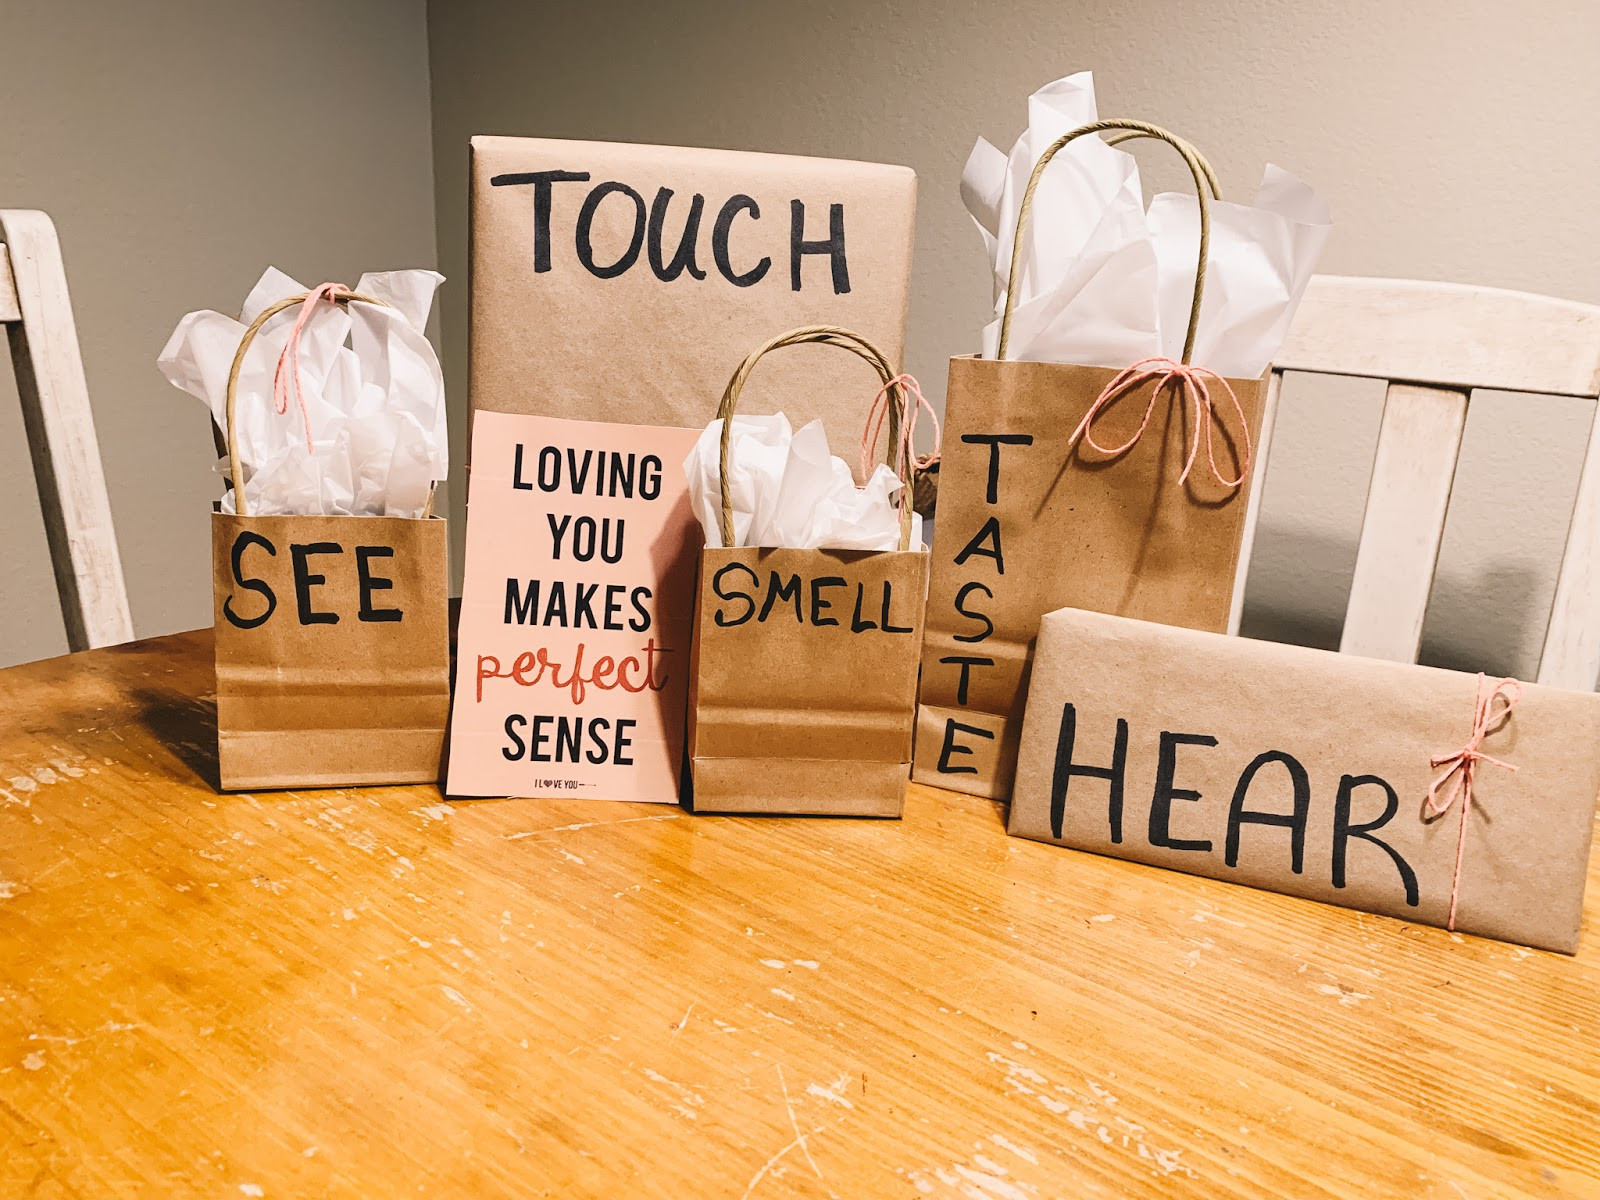 Valentine'S Day Gift Ideas
 The 5 Senses Valentines Day Gift Ideas for Him & Her